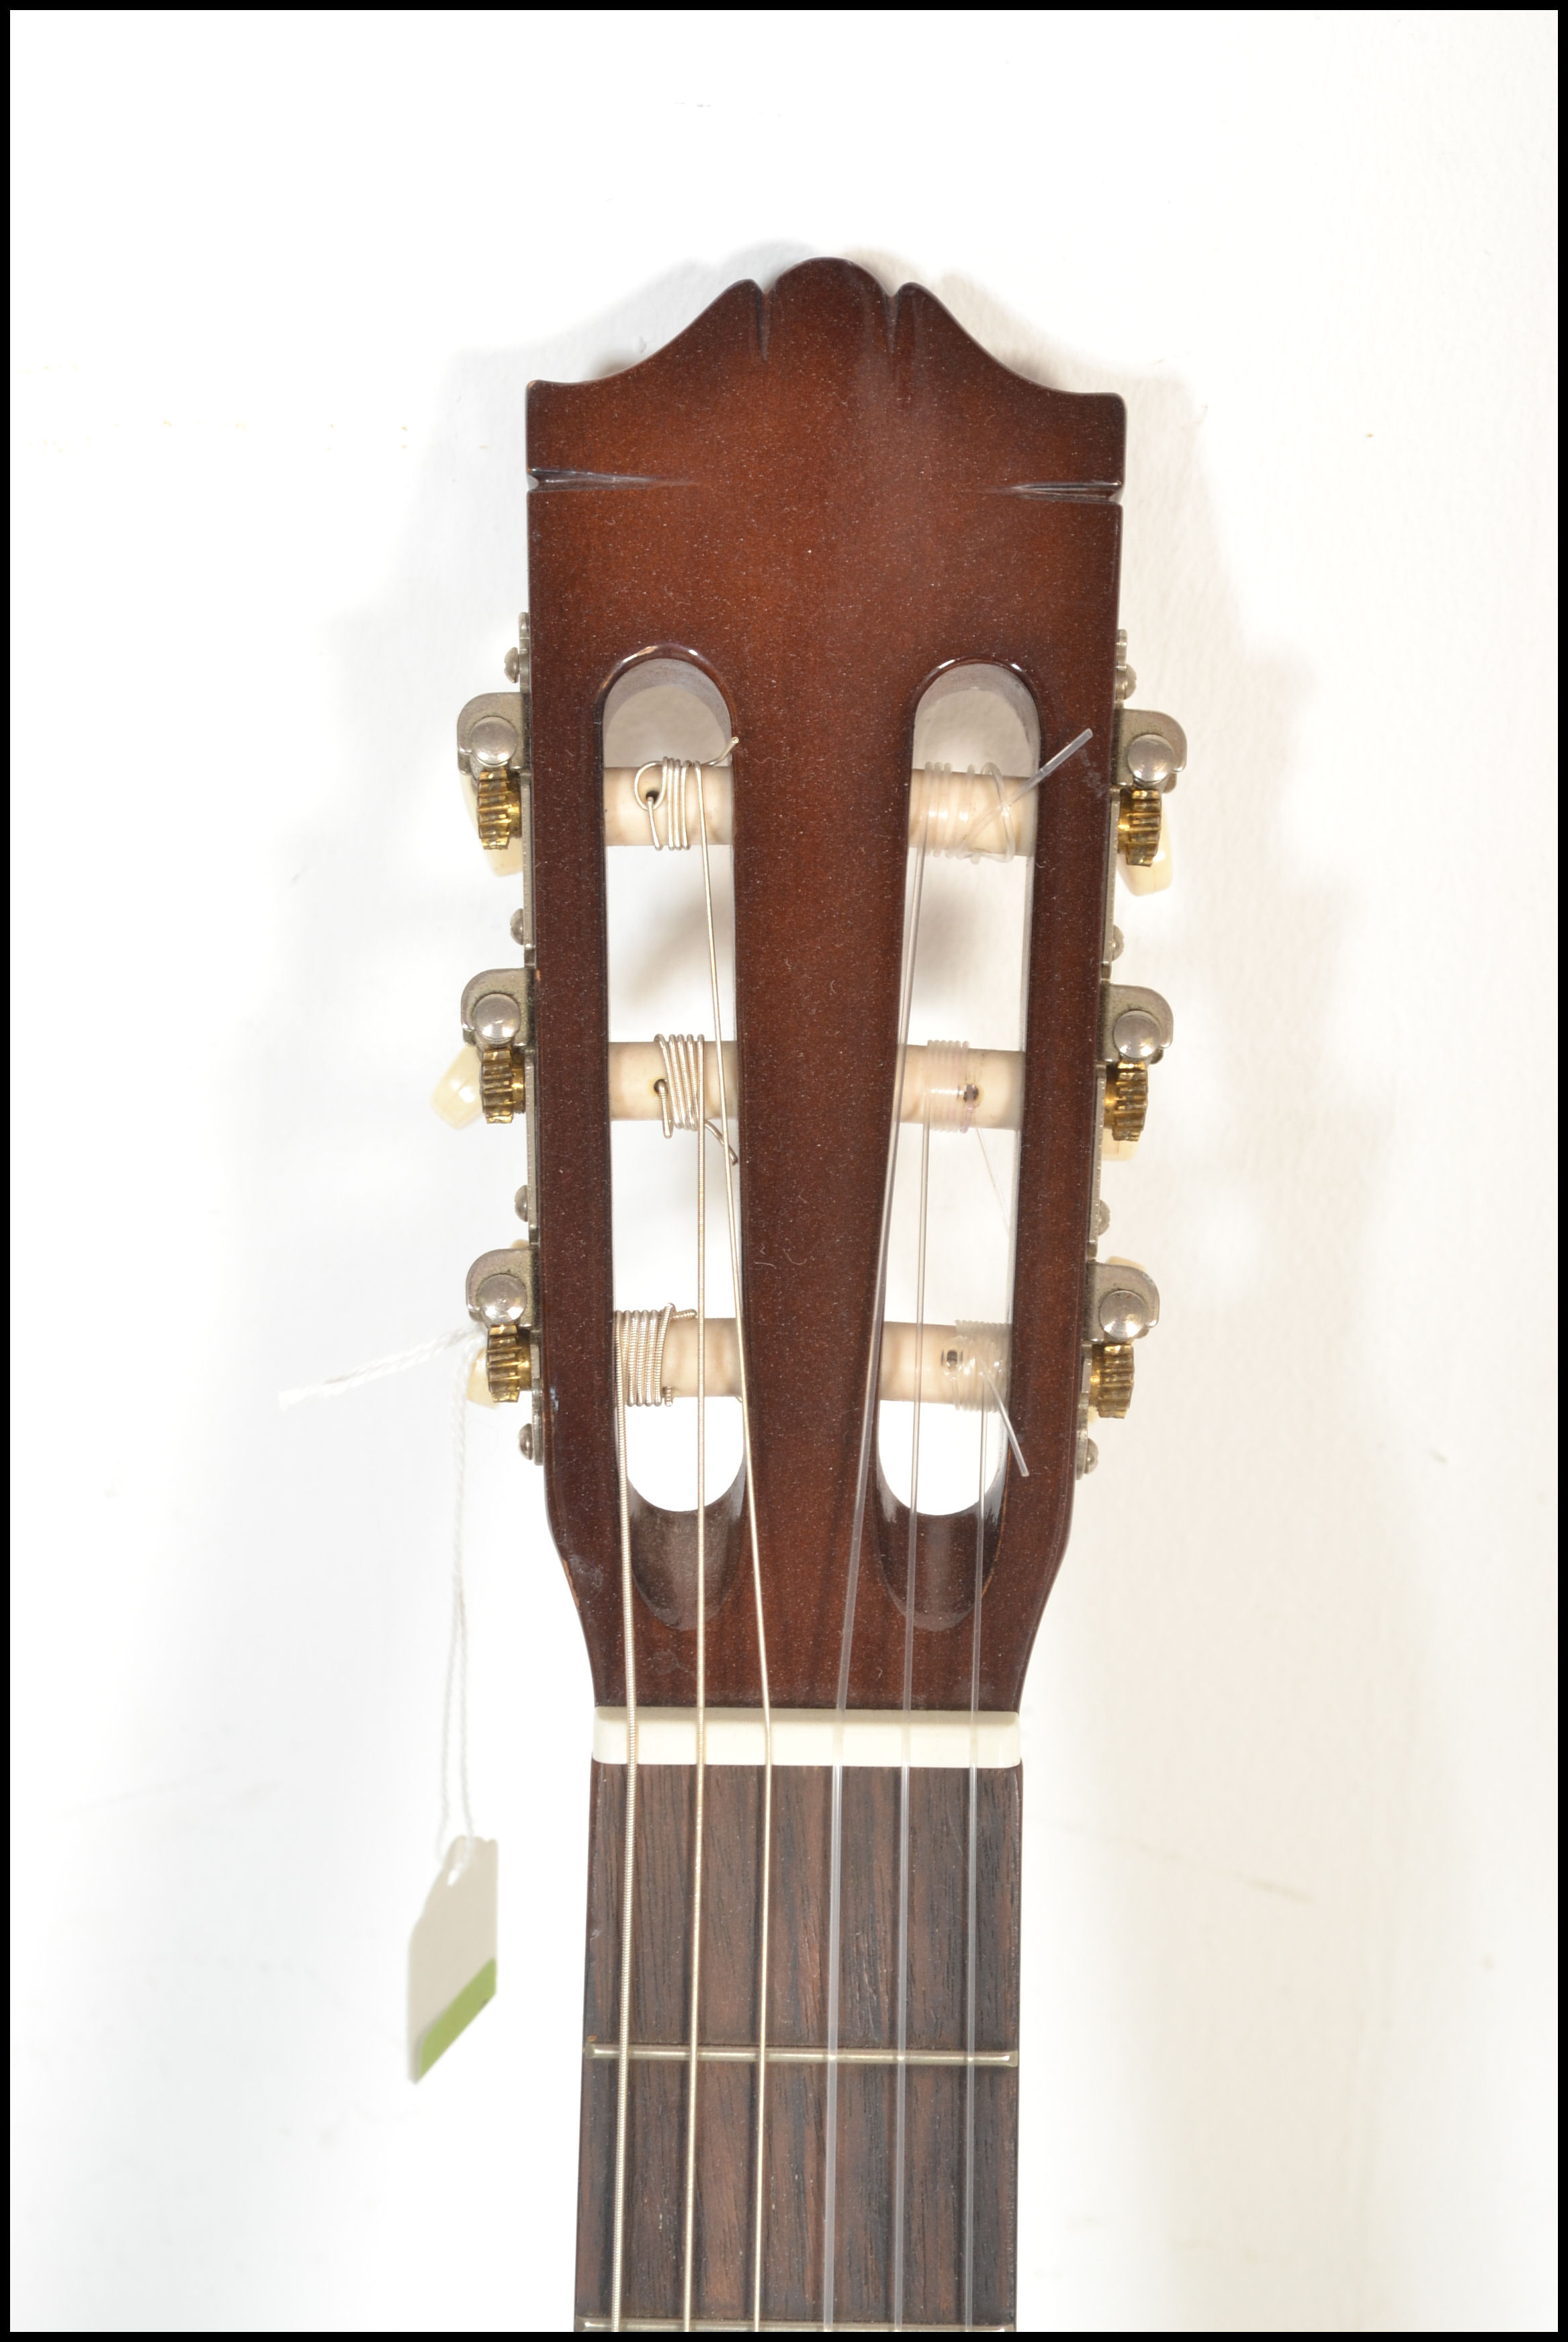 A Yamaha C40 six string acoustic guitar having a s - Image 2 of 5